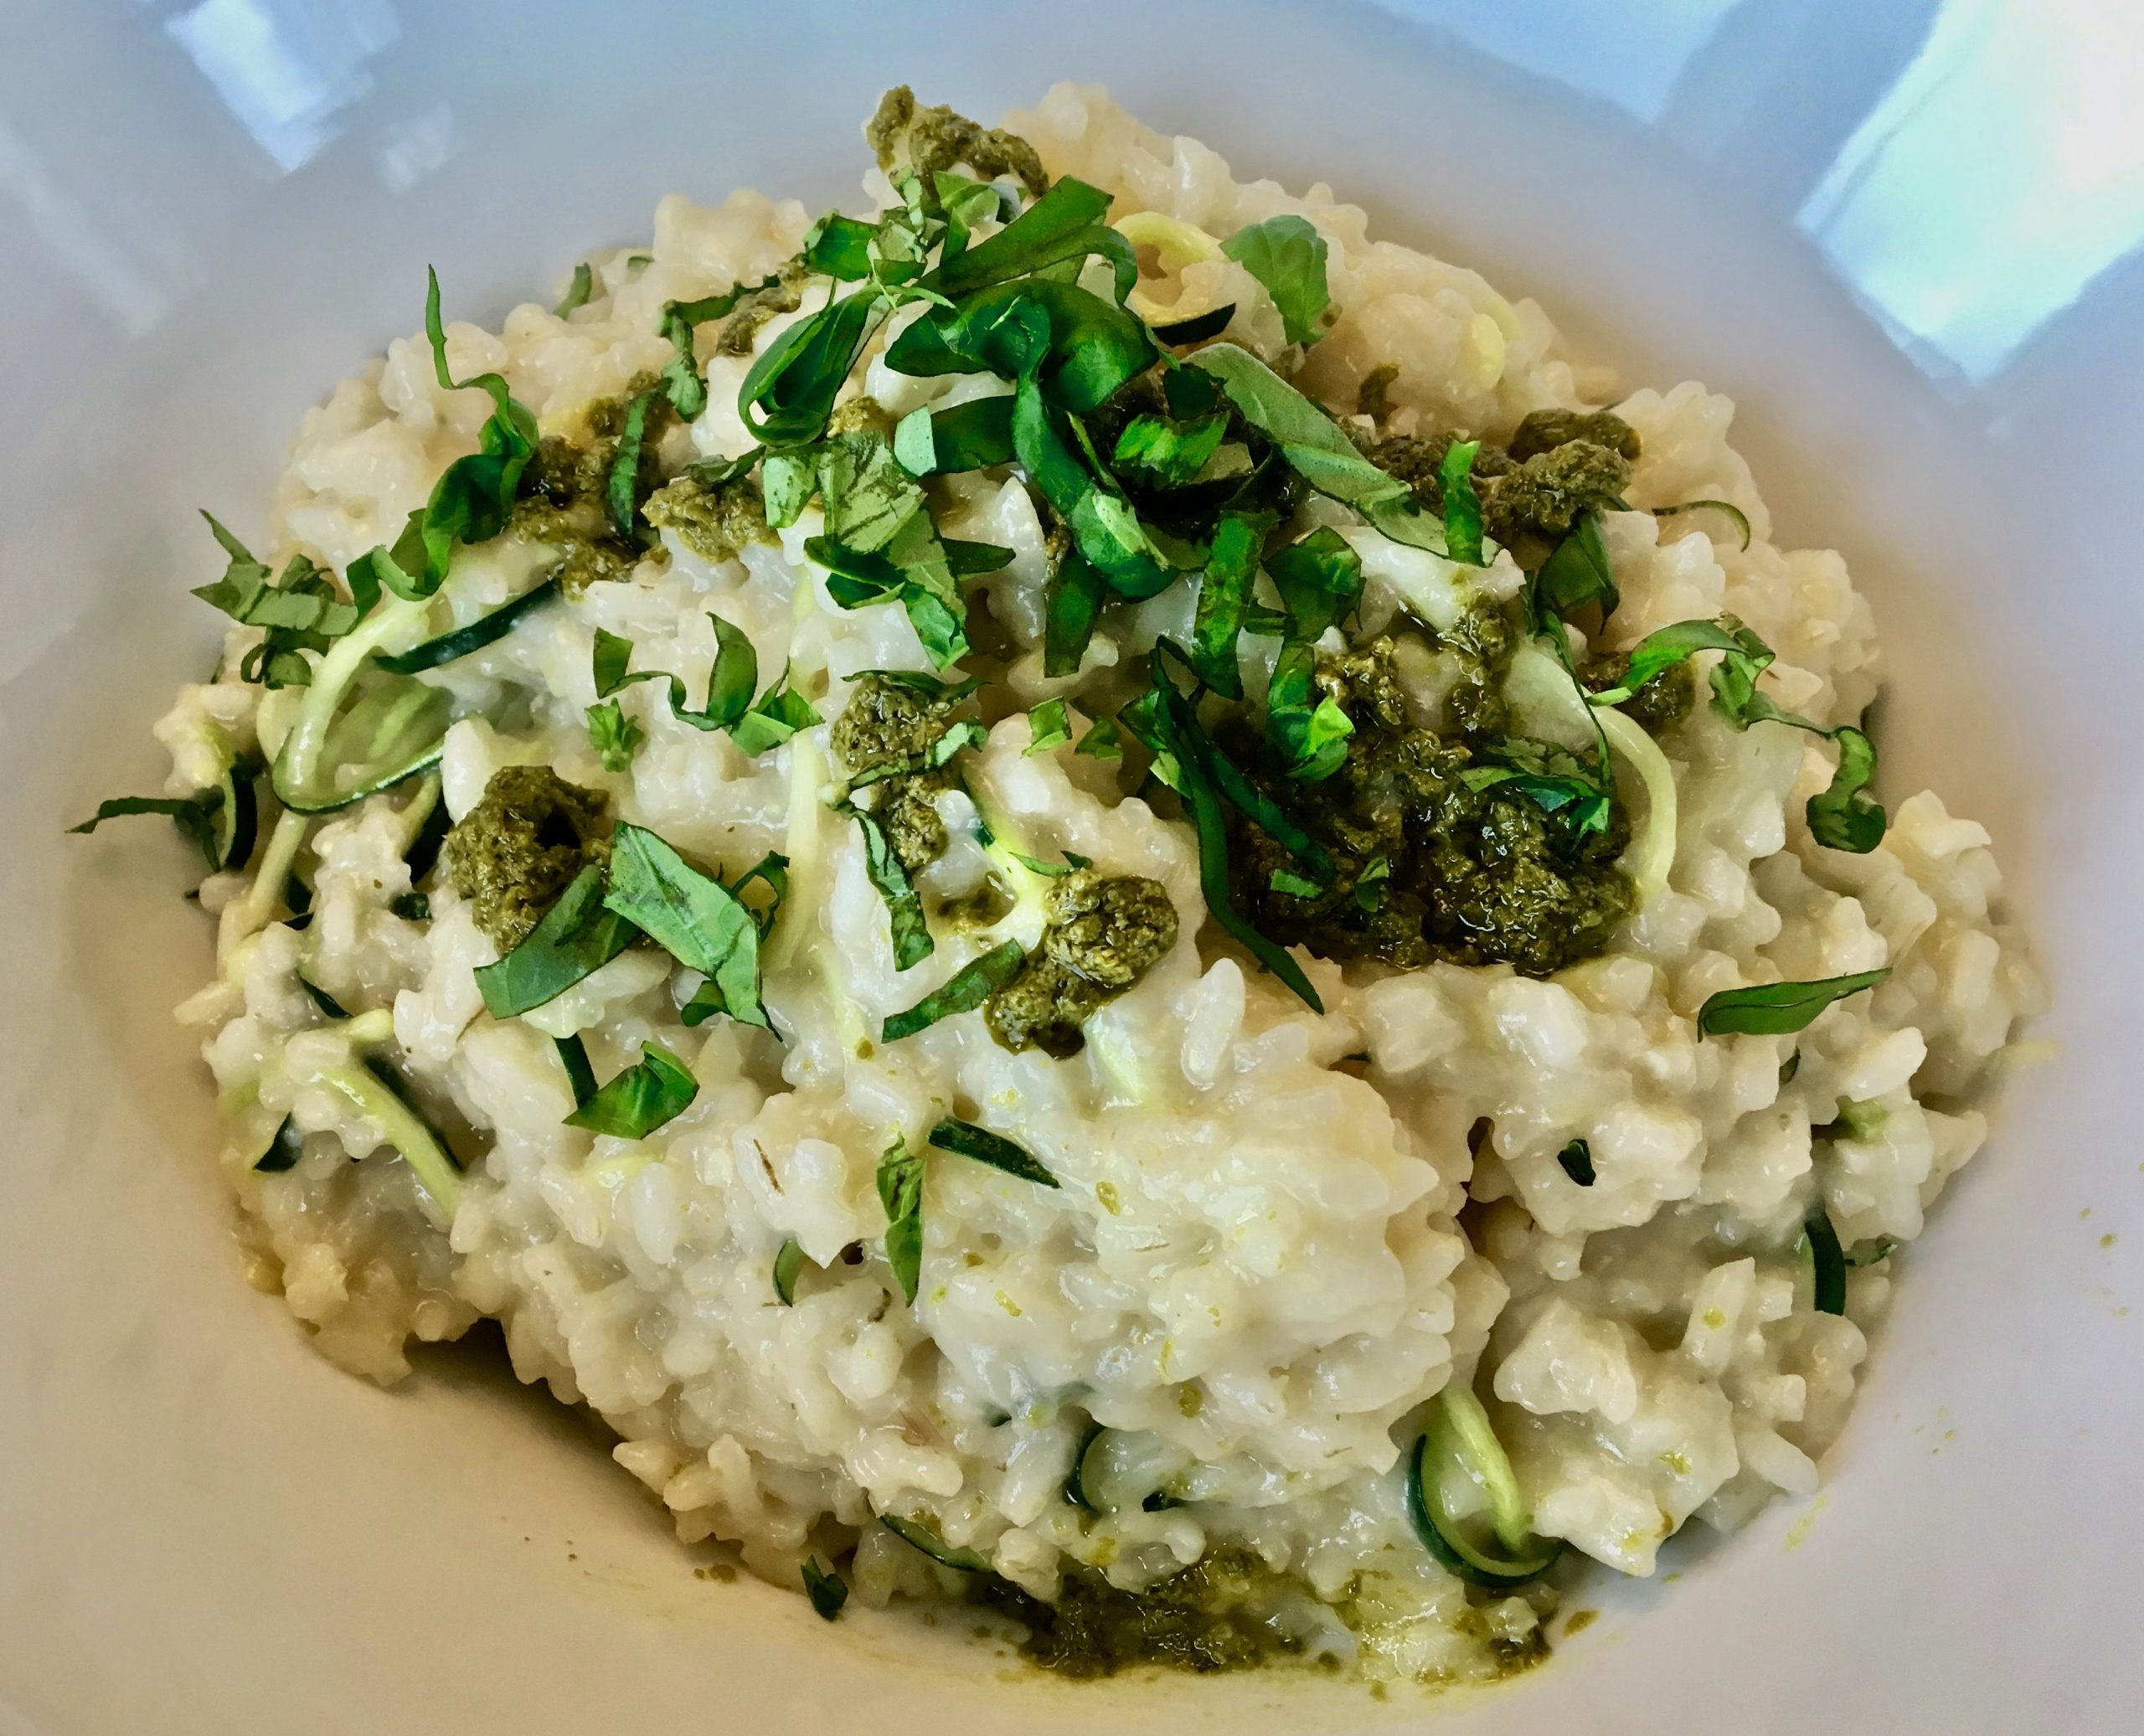 Summer risotto for one